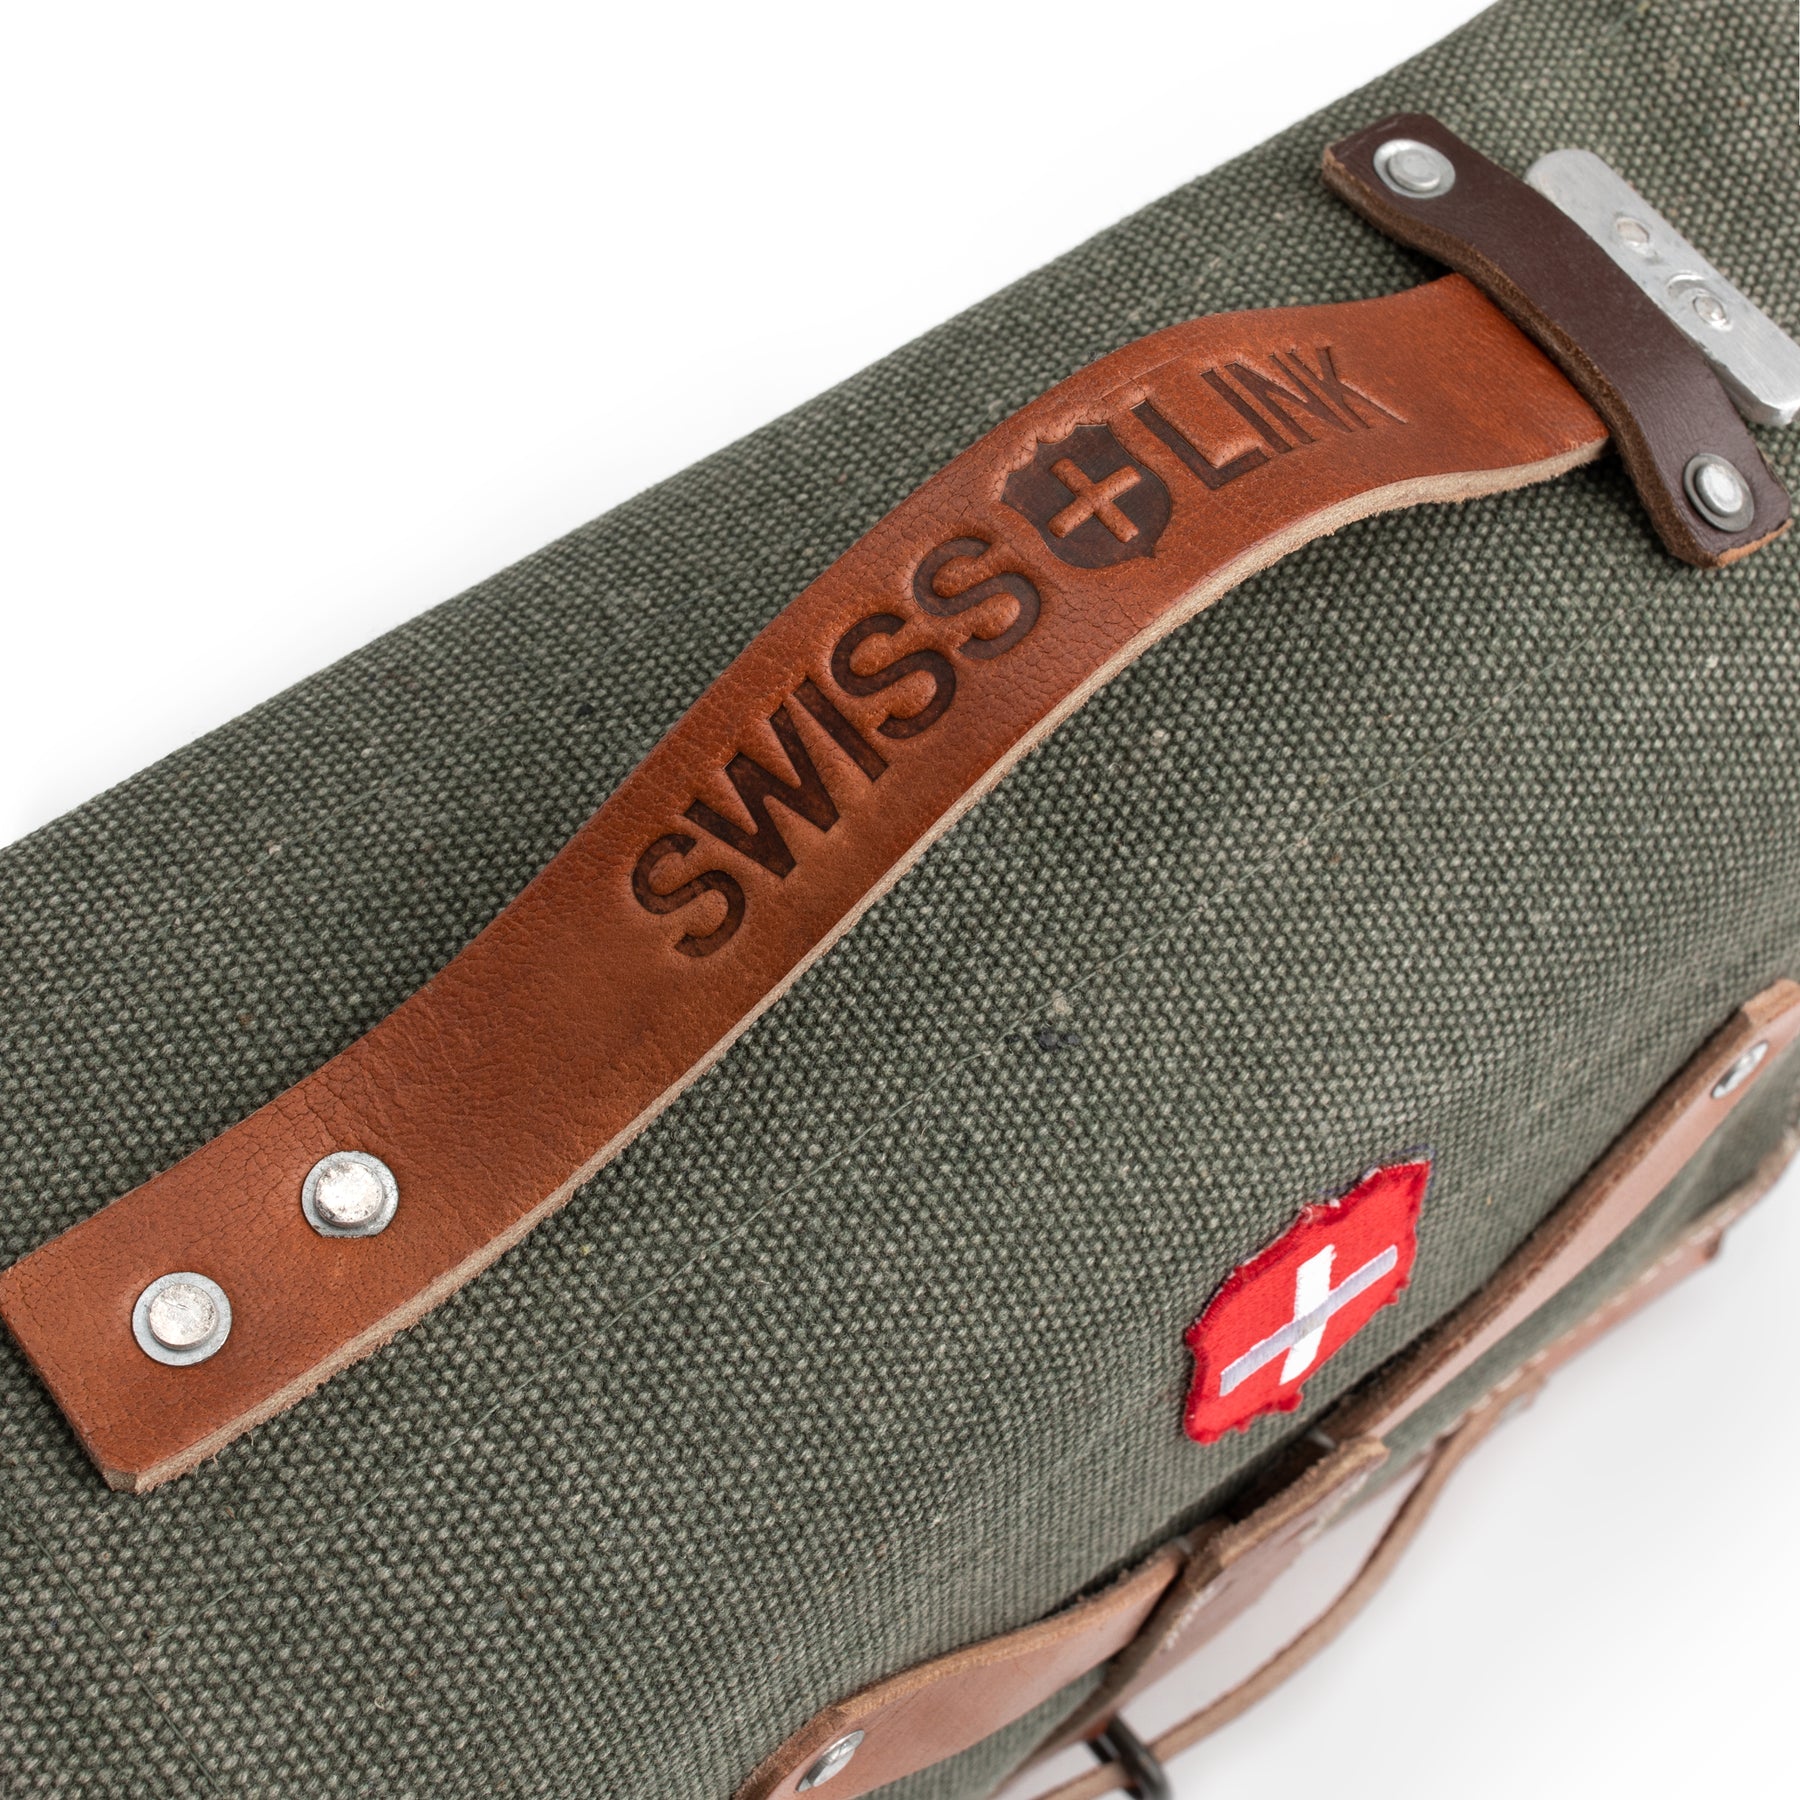 Swiss Link Ammo Bag | Reproduction